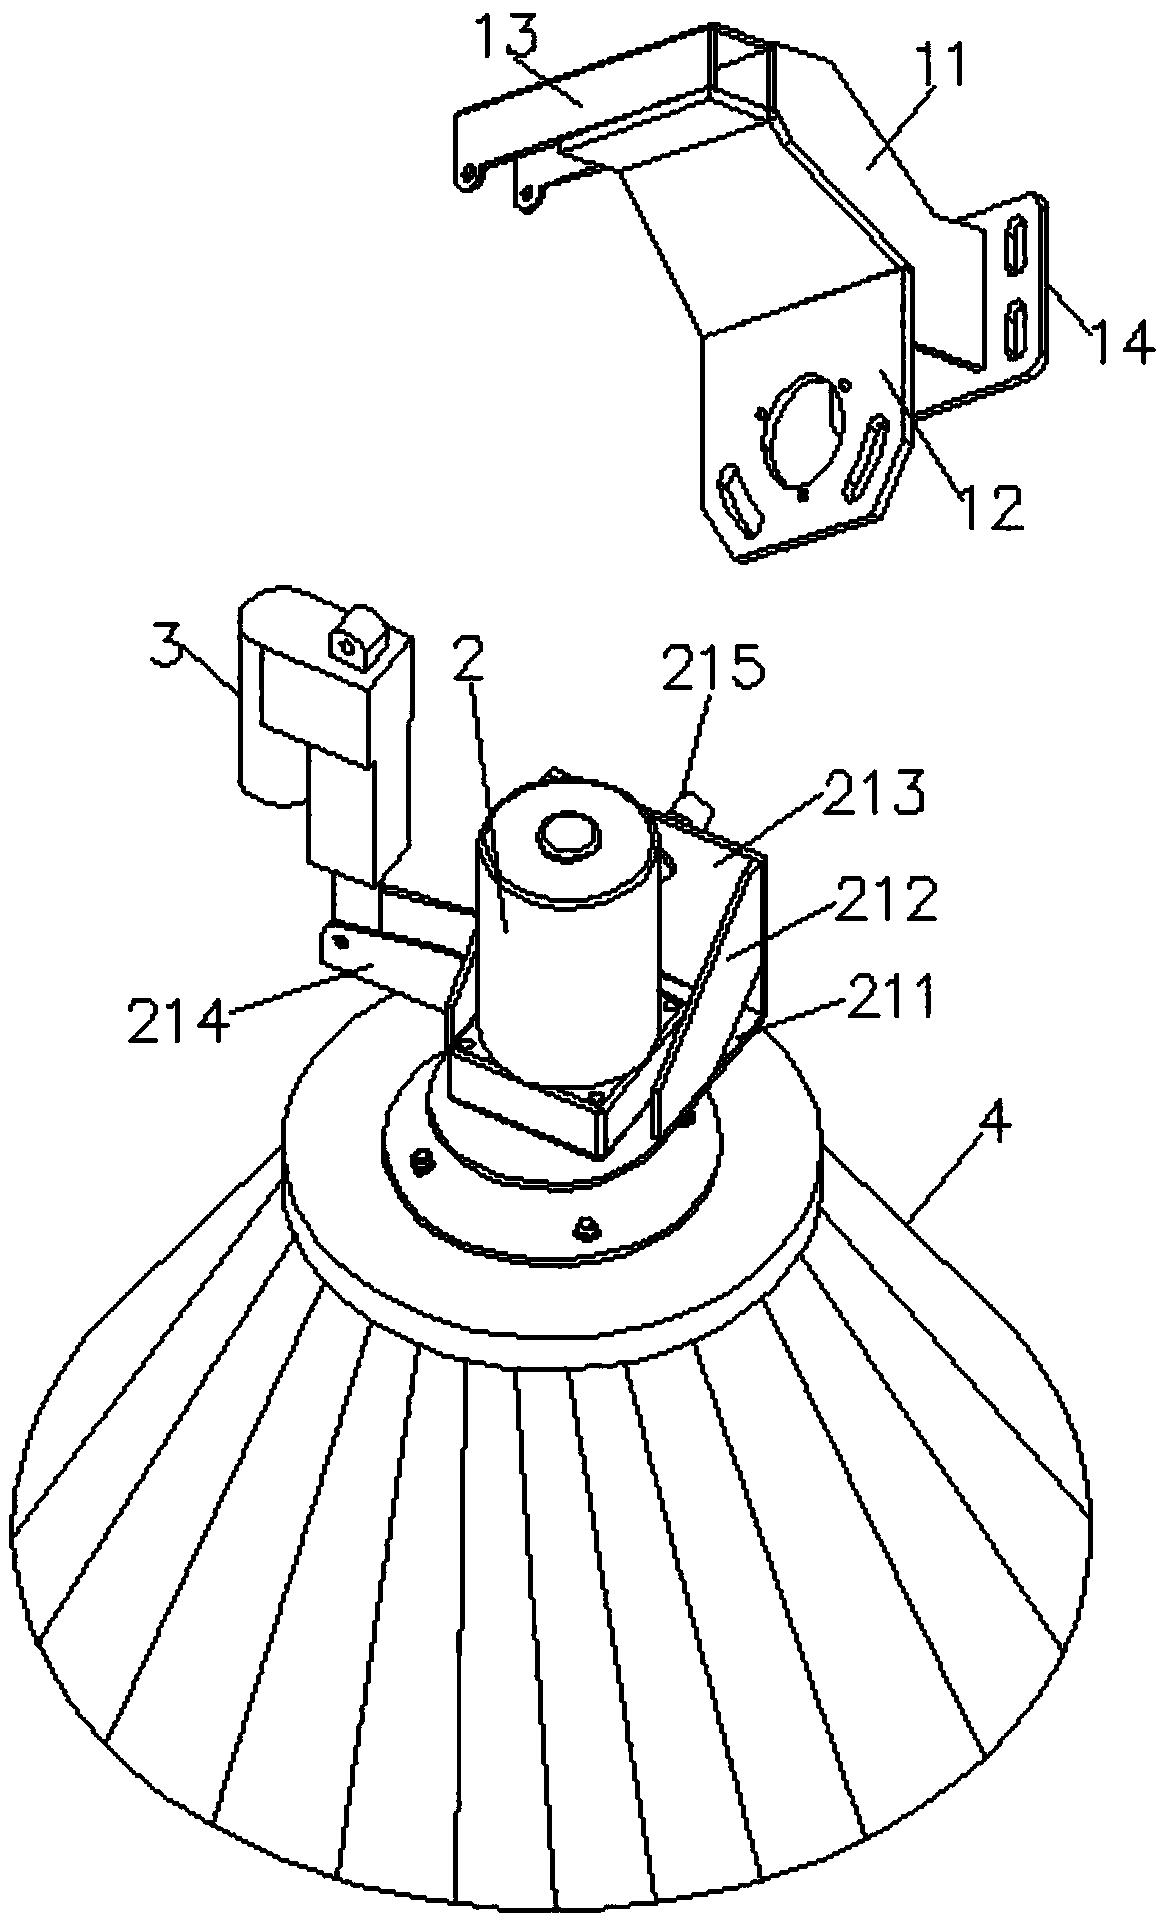 An environment sanitation vehicle sweeping disk structure with turnover function